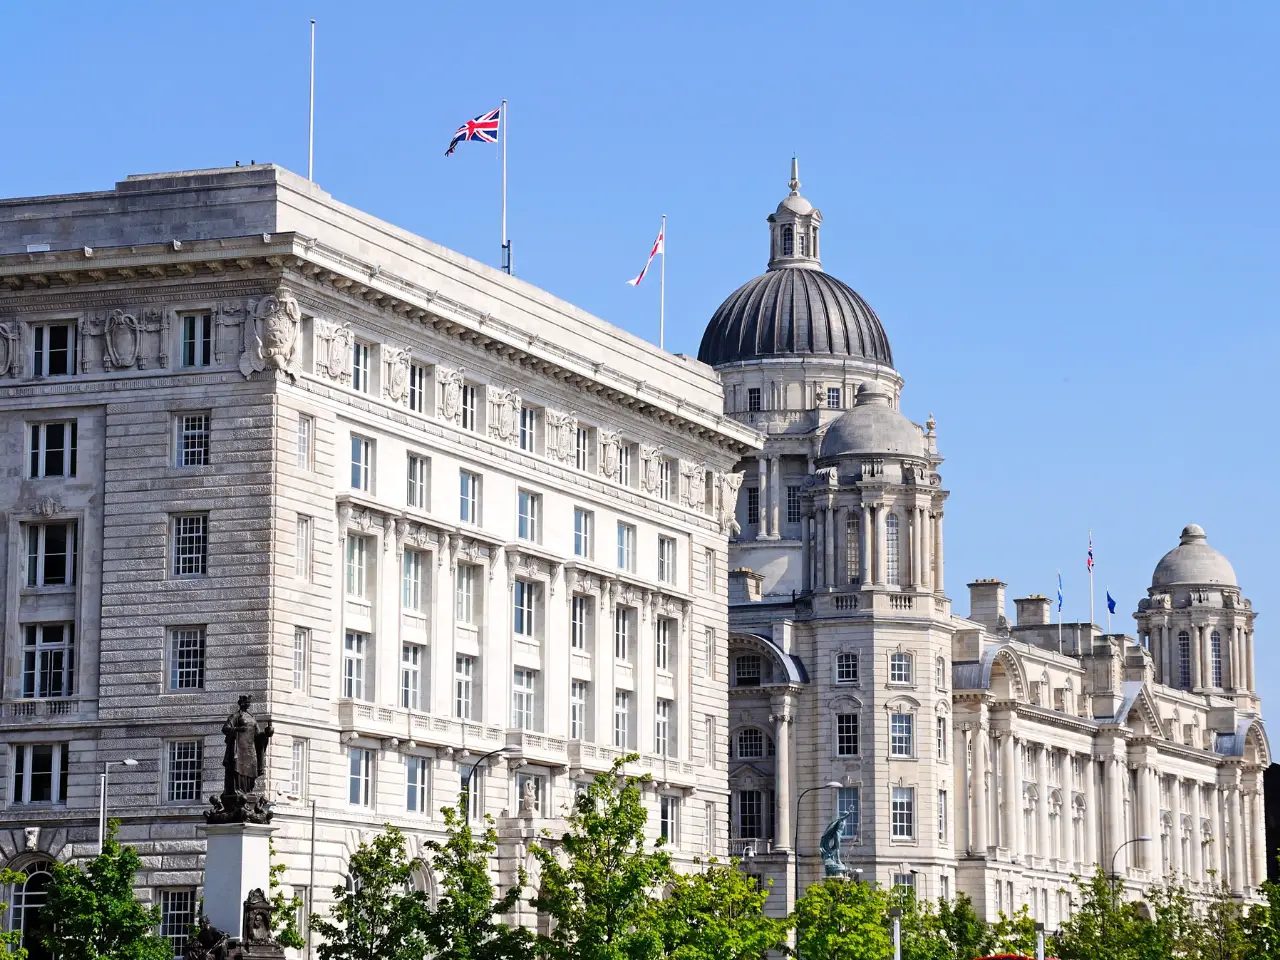 Liverpool Cunard Building, one of the most famous landmarks in Liverpool